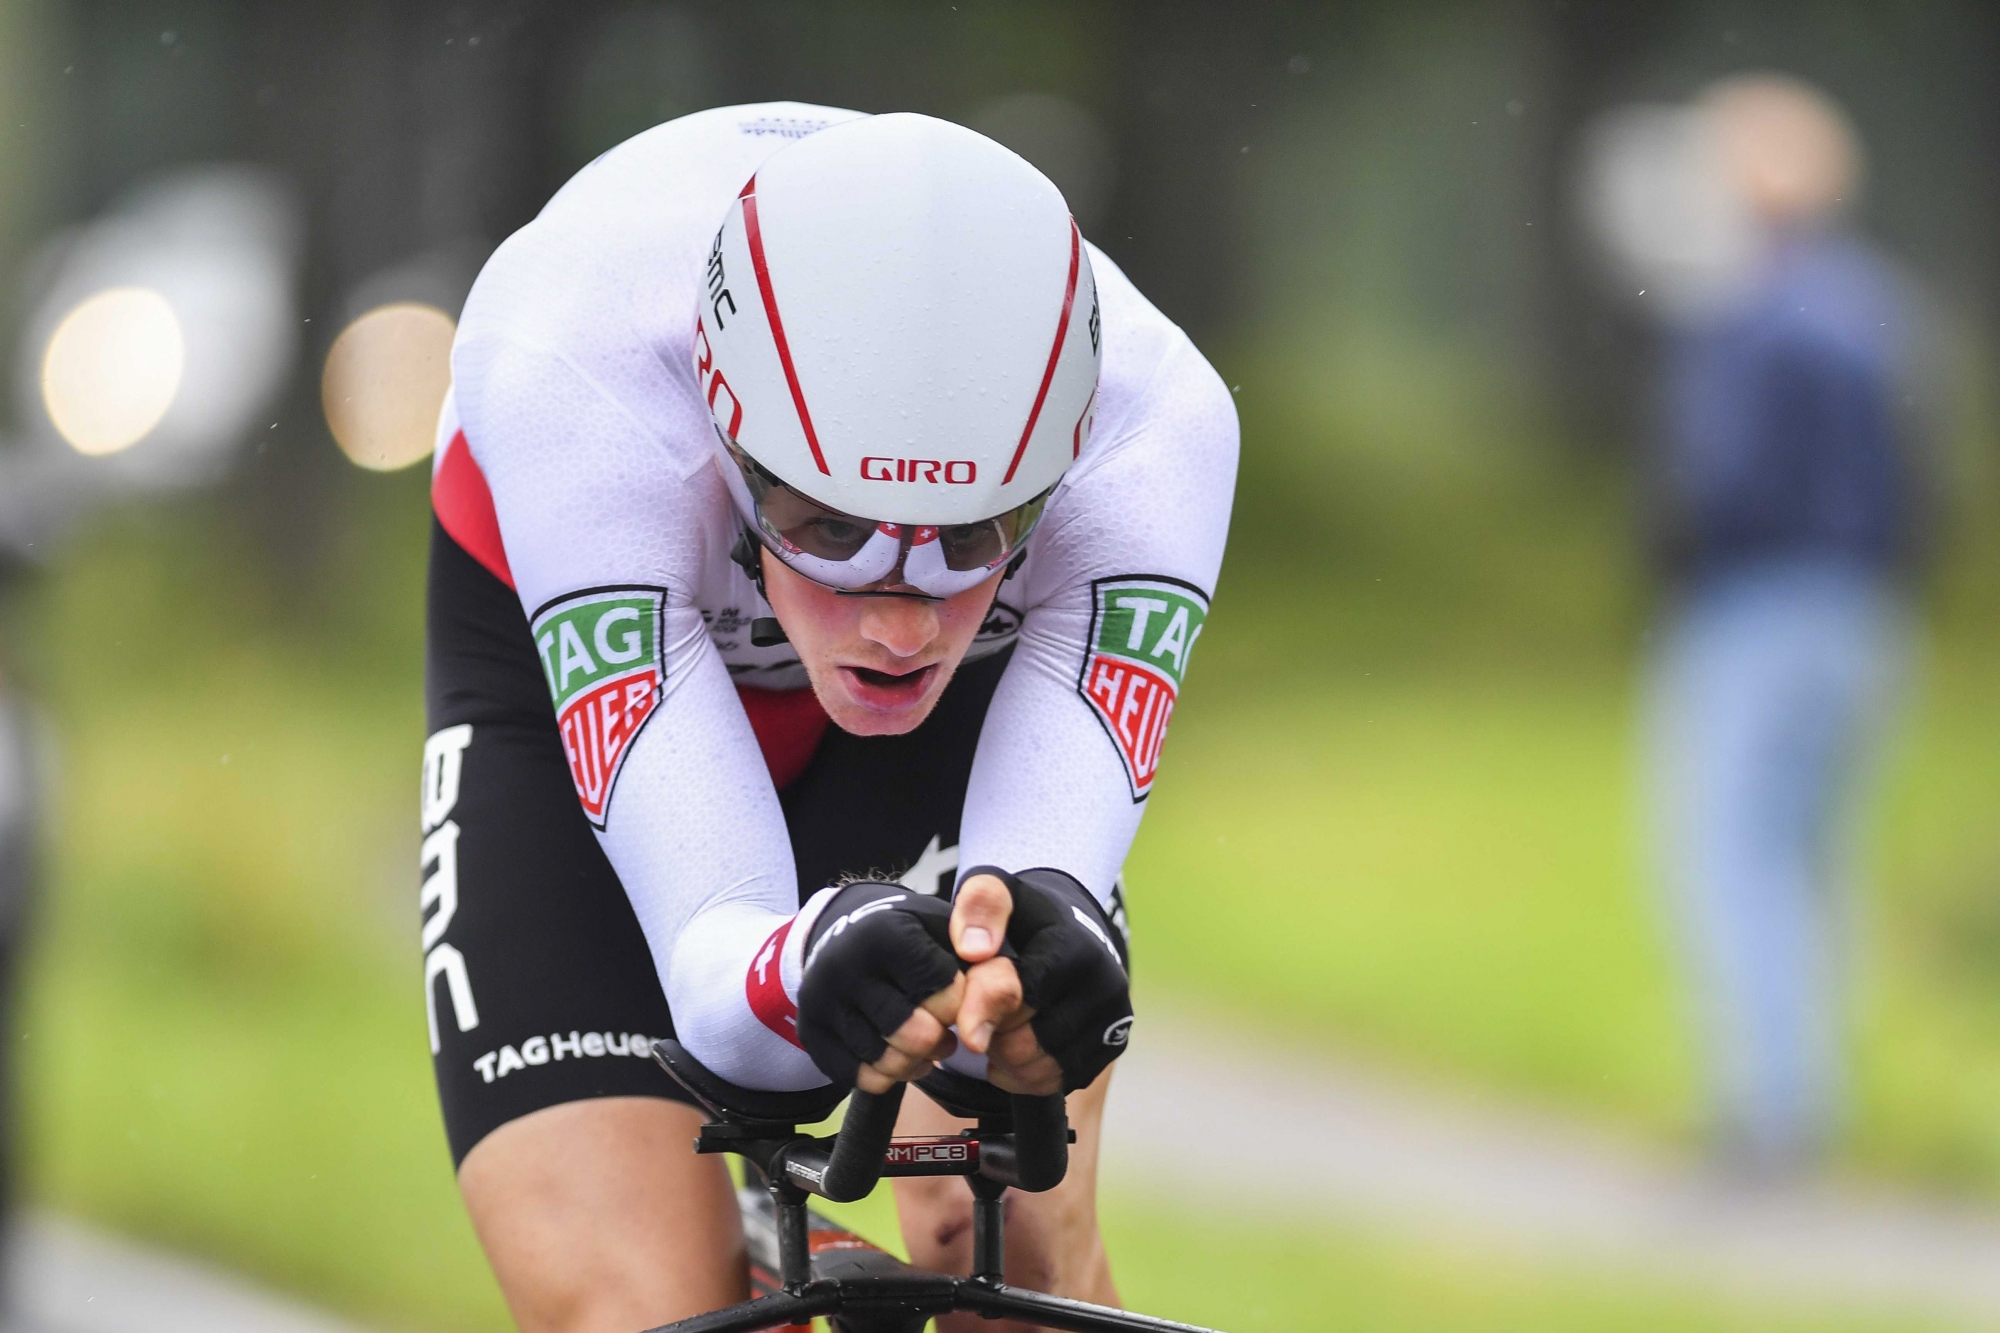 epa06132125 Swiss rider Stefan Kung in action during the individual time trial of 9 kilometers on the the second leg of the BinckBank Tour 2017 in Voorburg, The Netherlands, 08 August 2017.  EPA/VINCENT JANNINK NETHERLANDS CYCLING BINCKBANCK TOUR